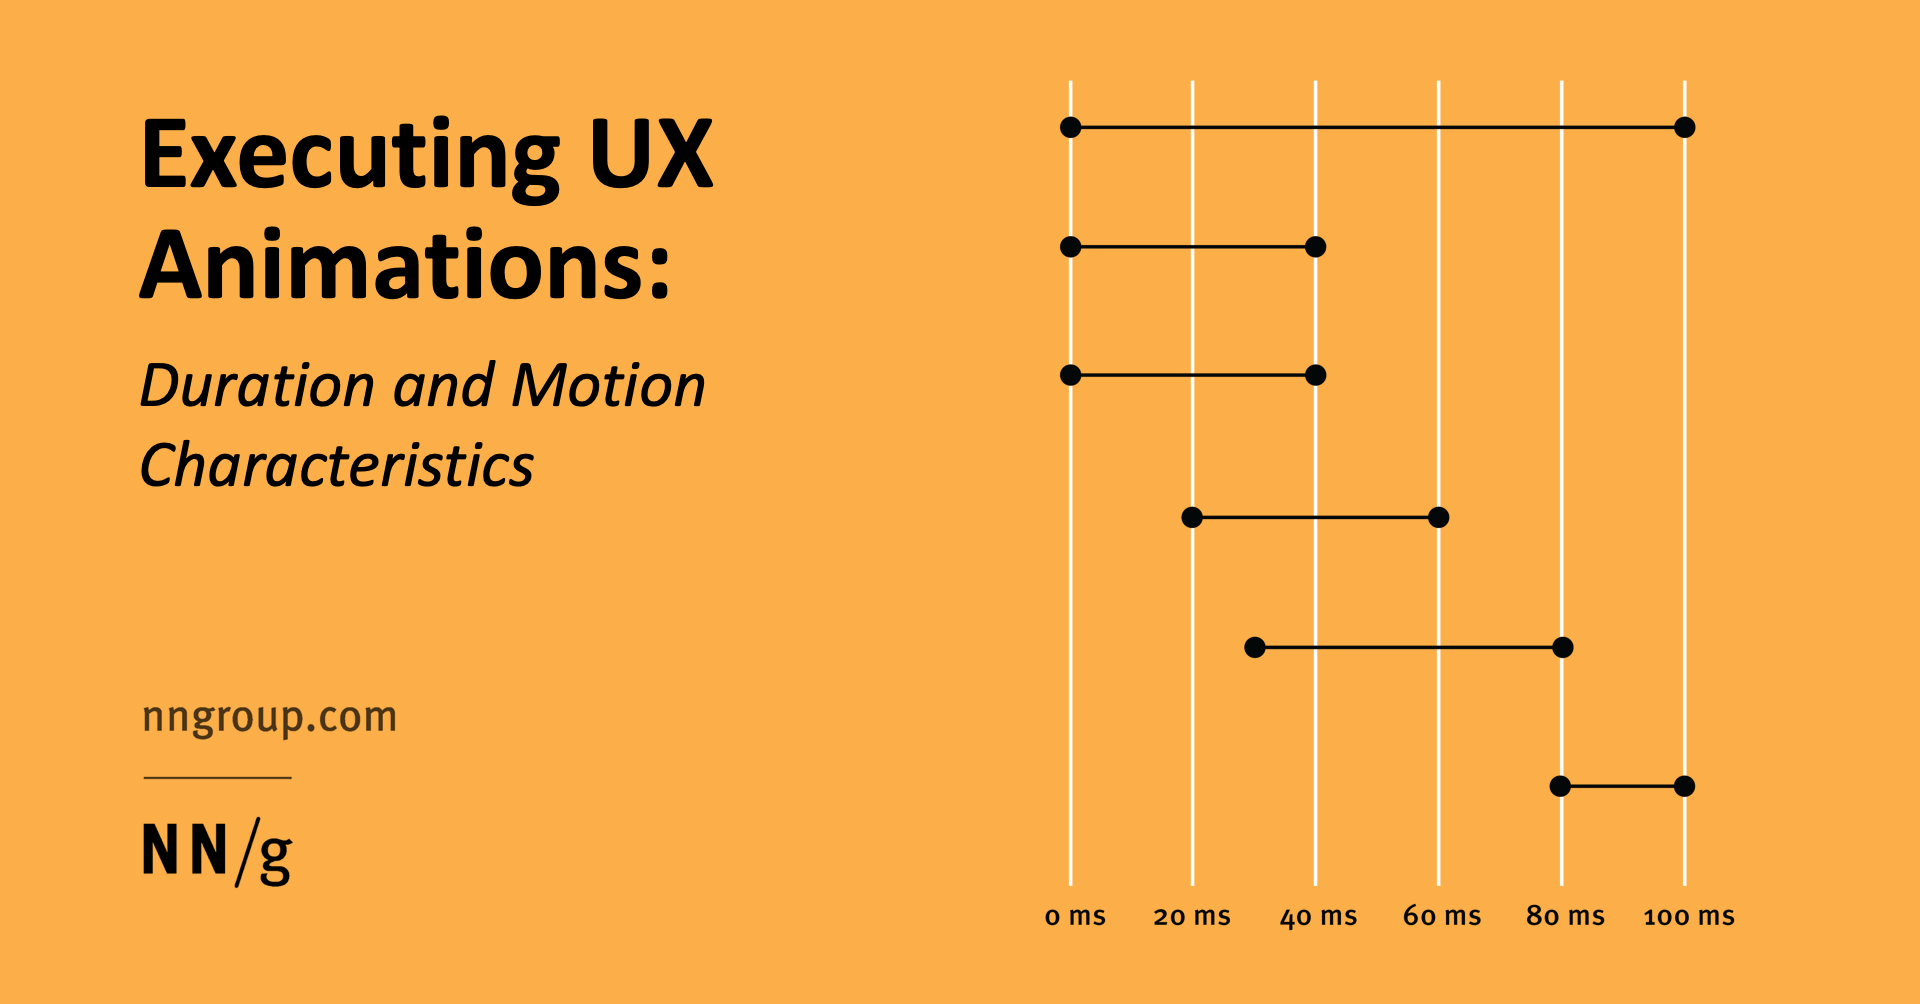 UX Animations